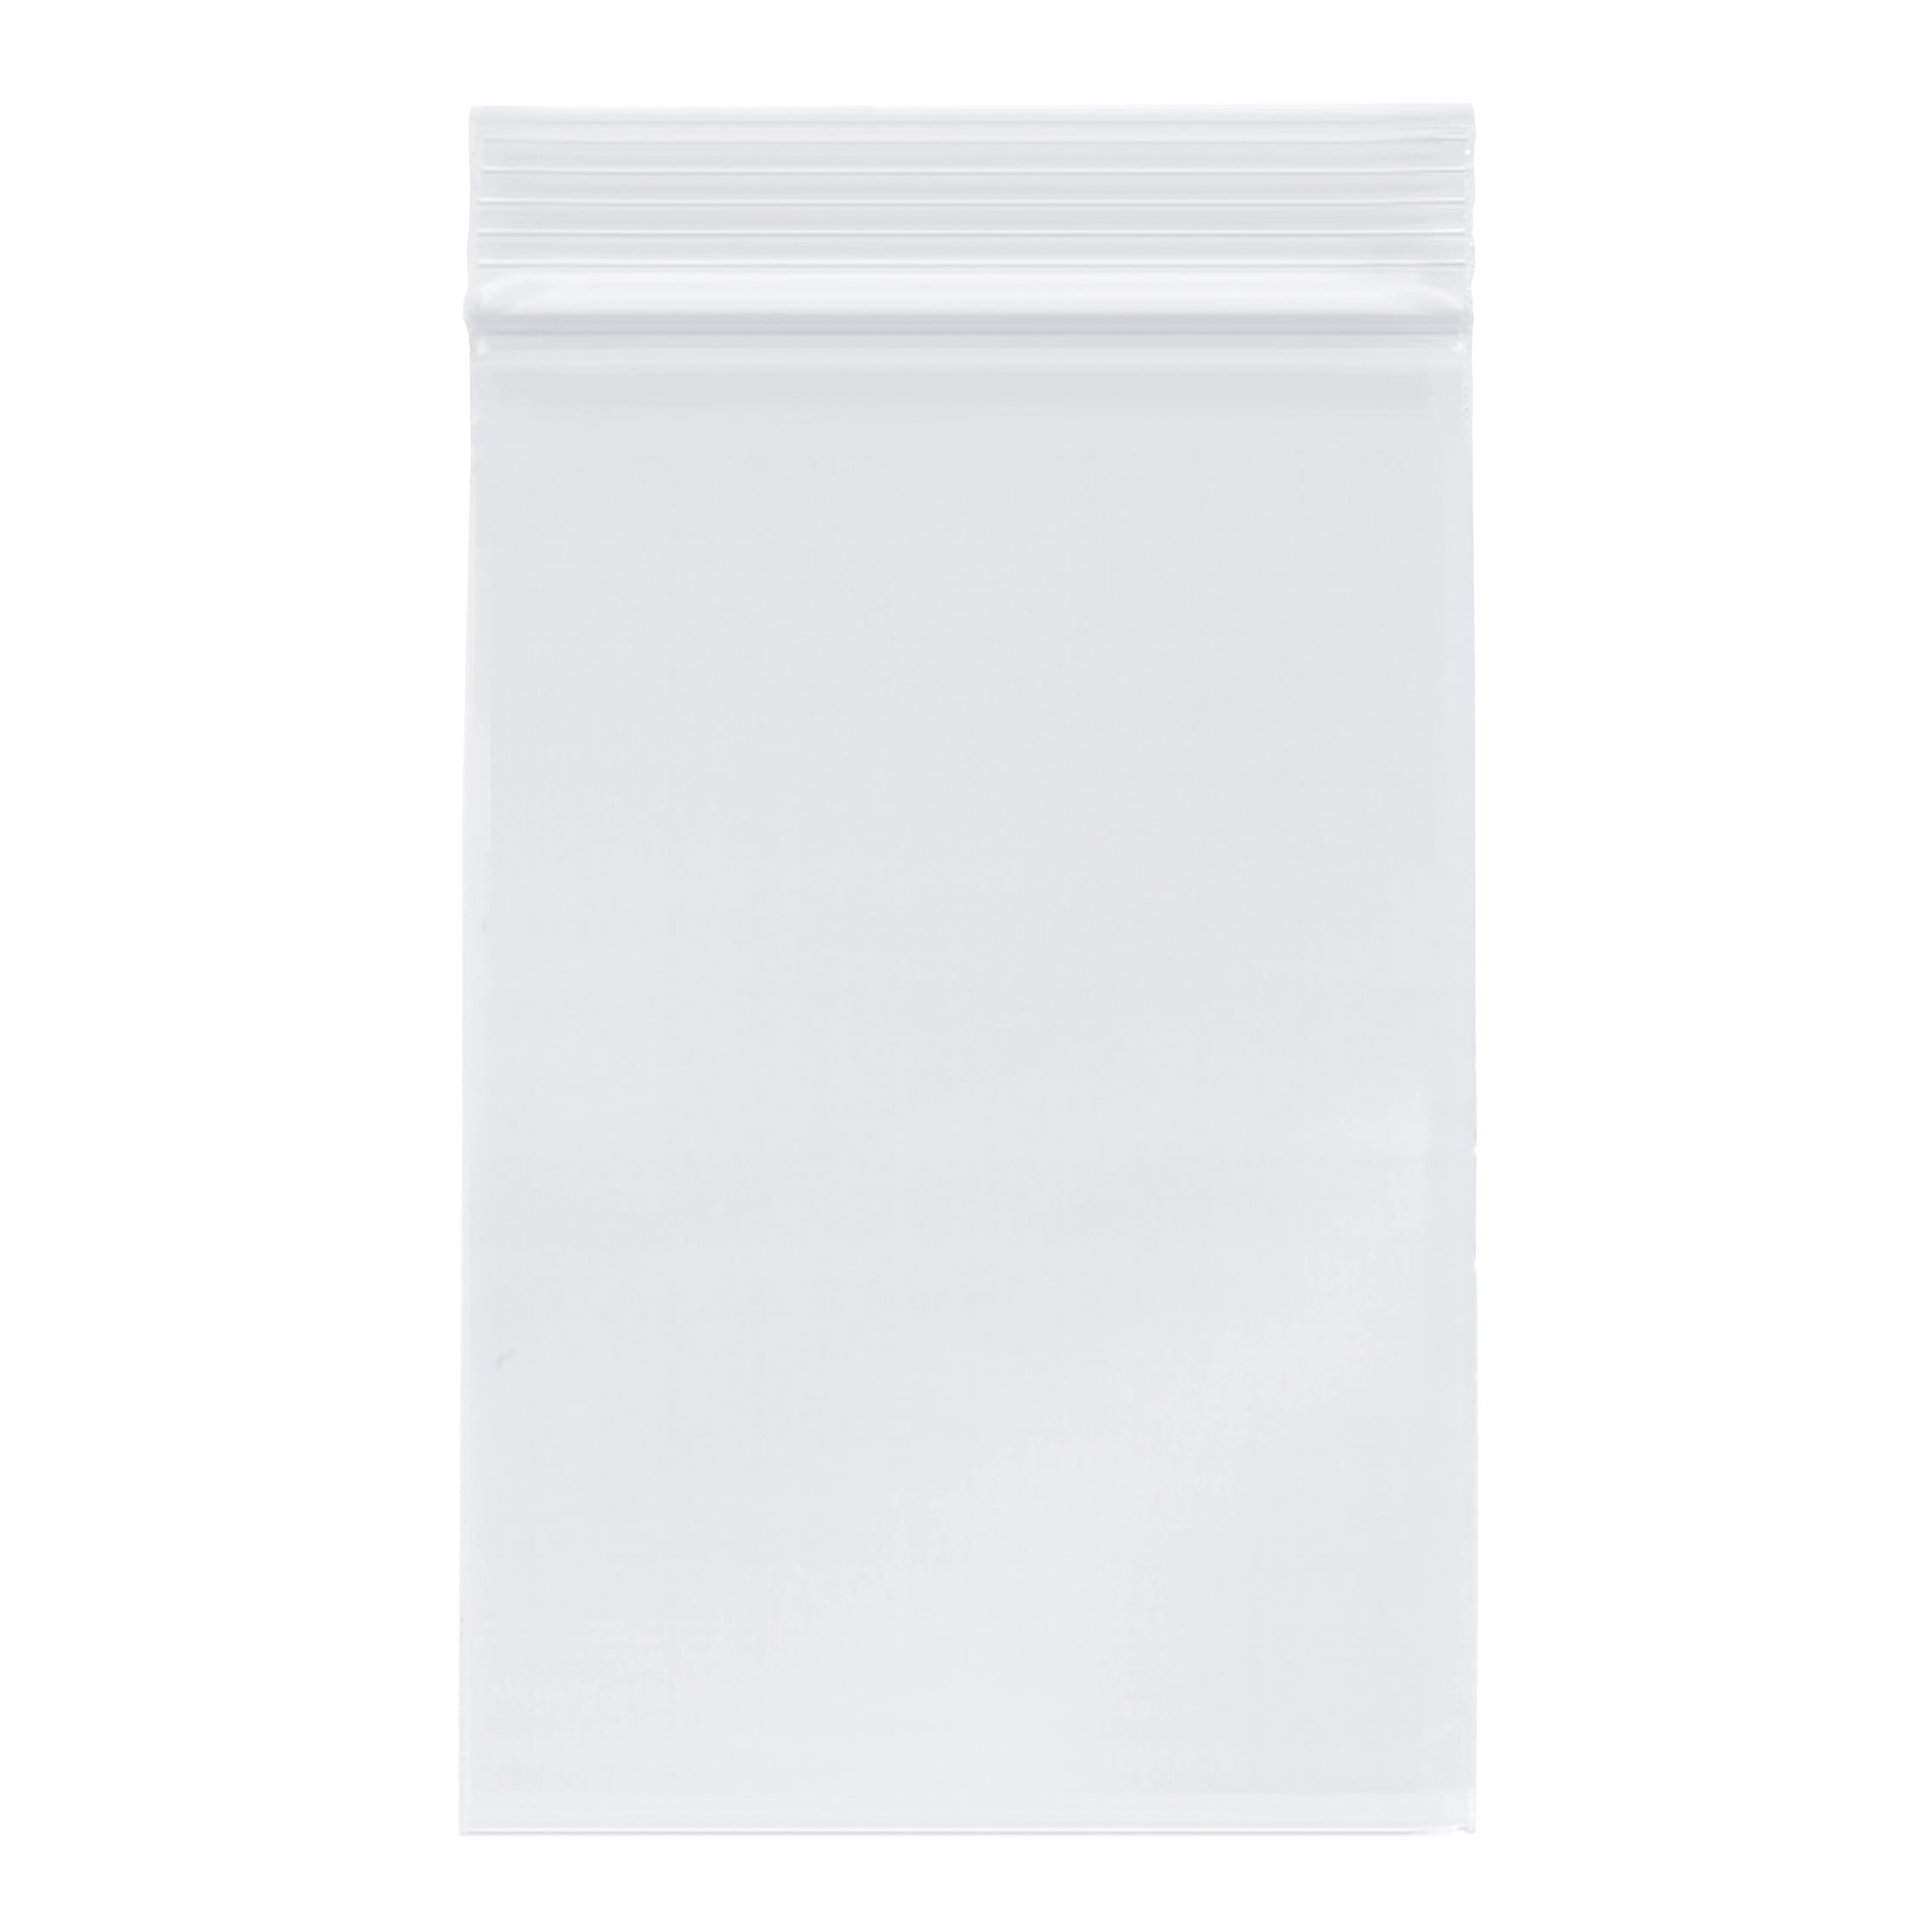 1-1000 9x12 4MIL Reclosable Resealable Clear Zip Lock Plastic Bags 9" x 12" 